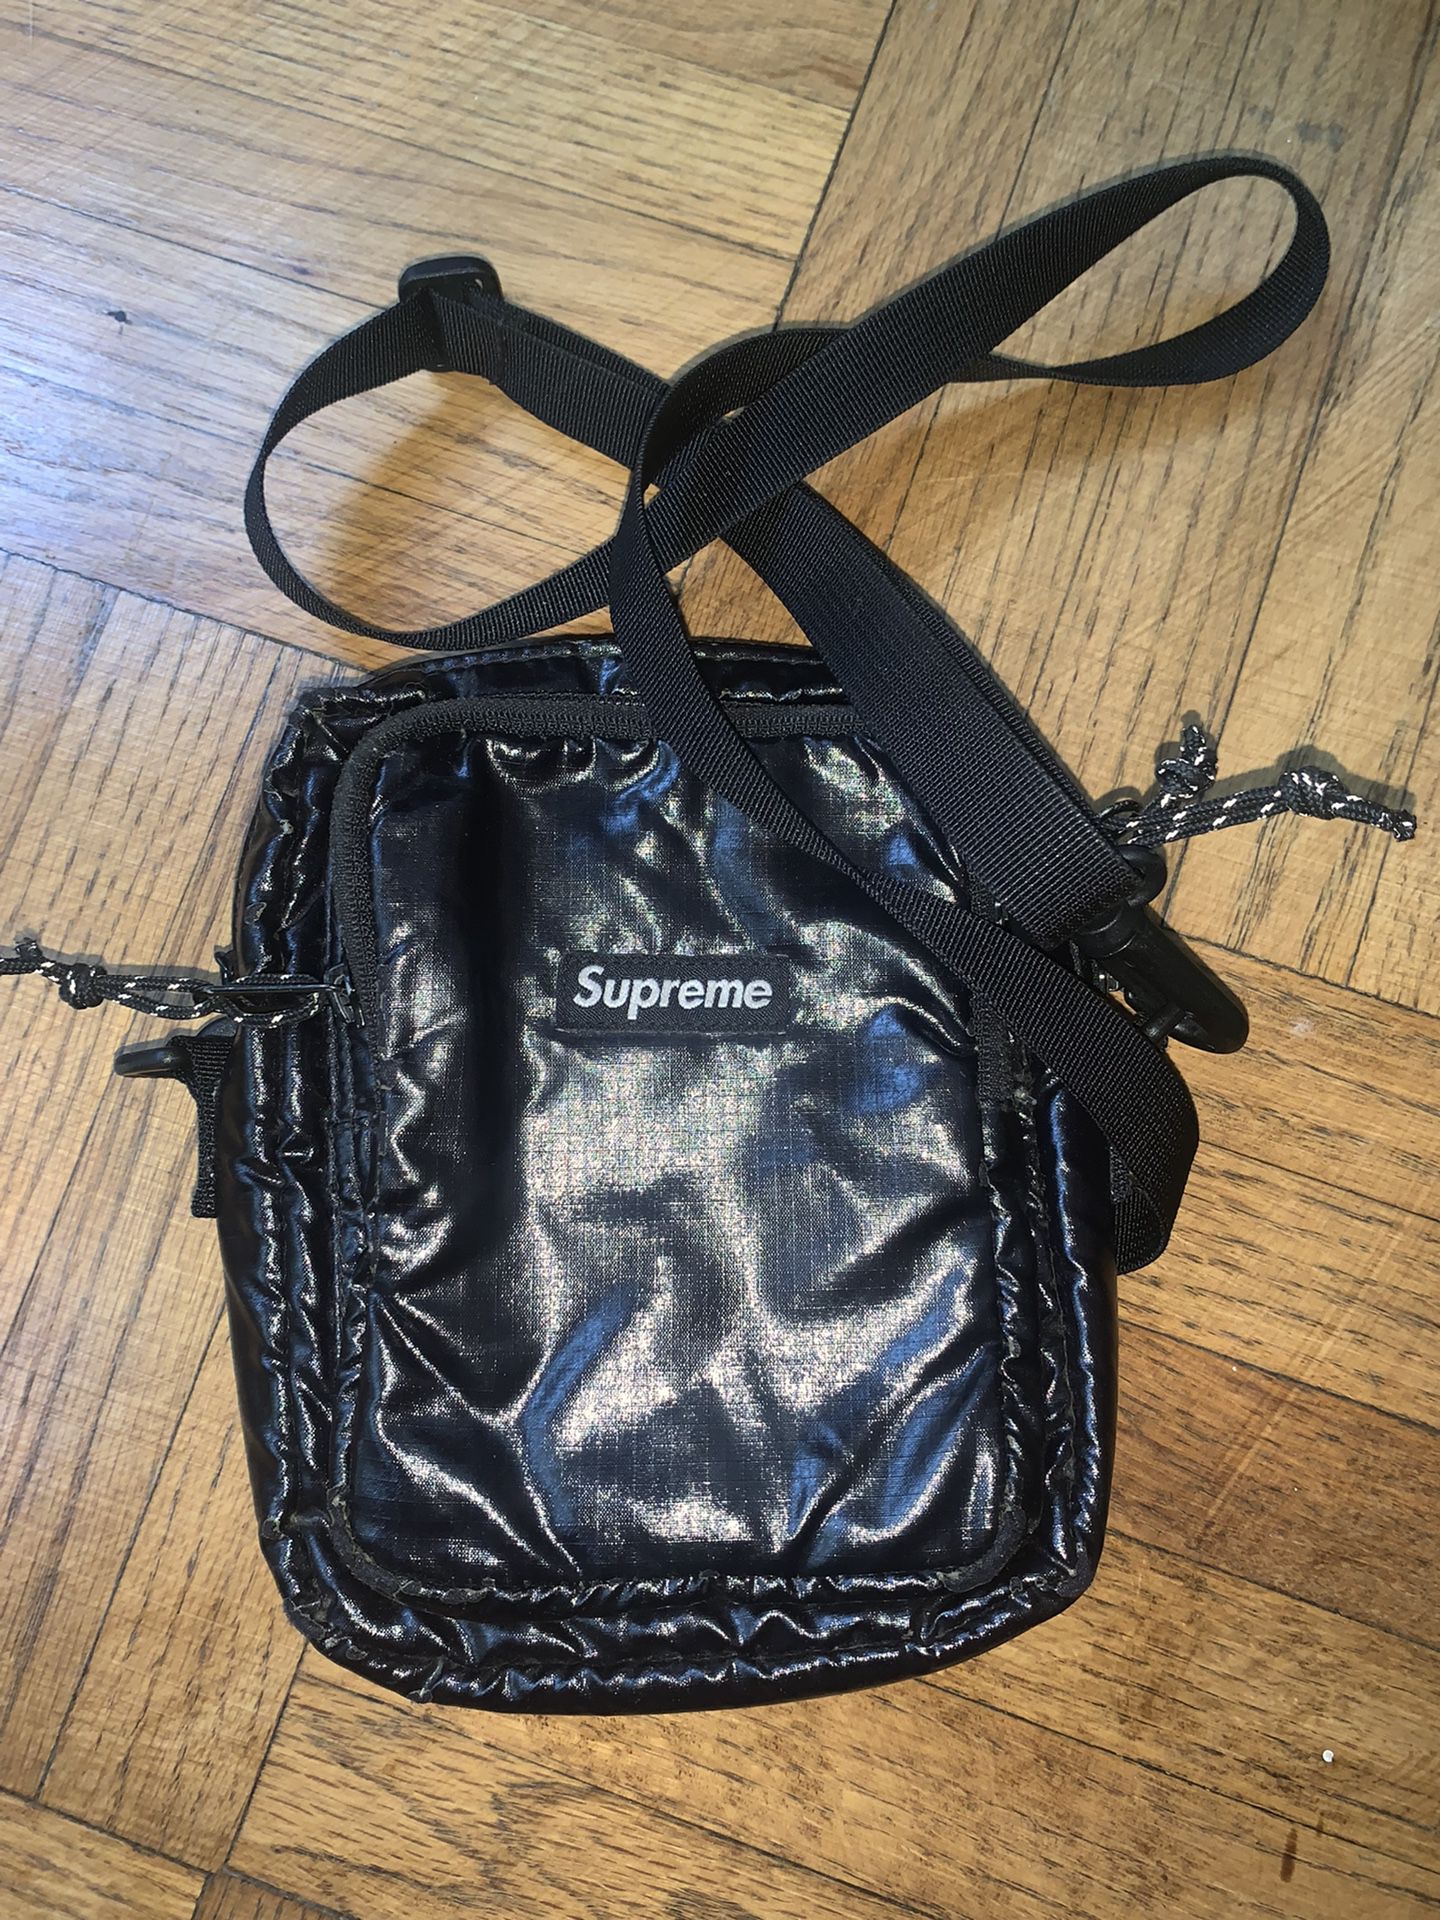 Supreme Utility Bag SS19 for Sale in Dallas, TX - OfferUp